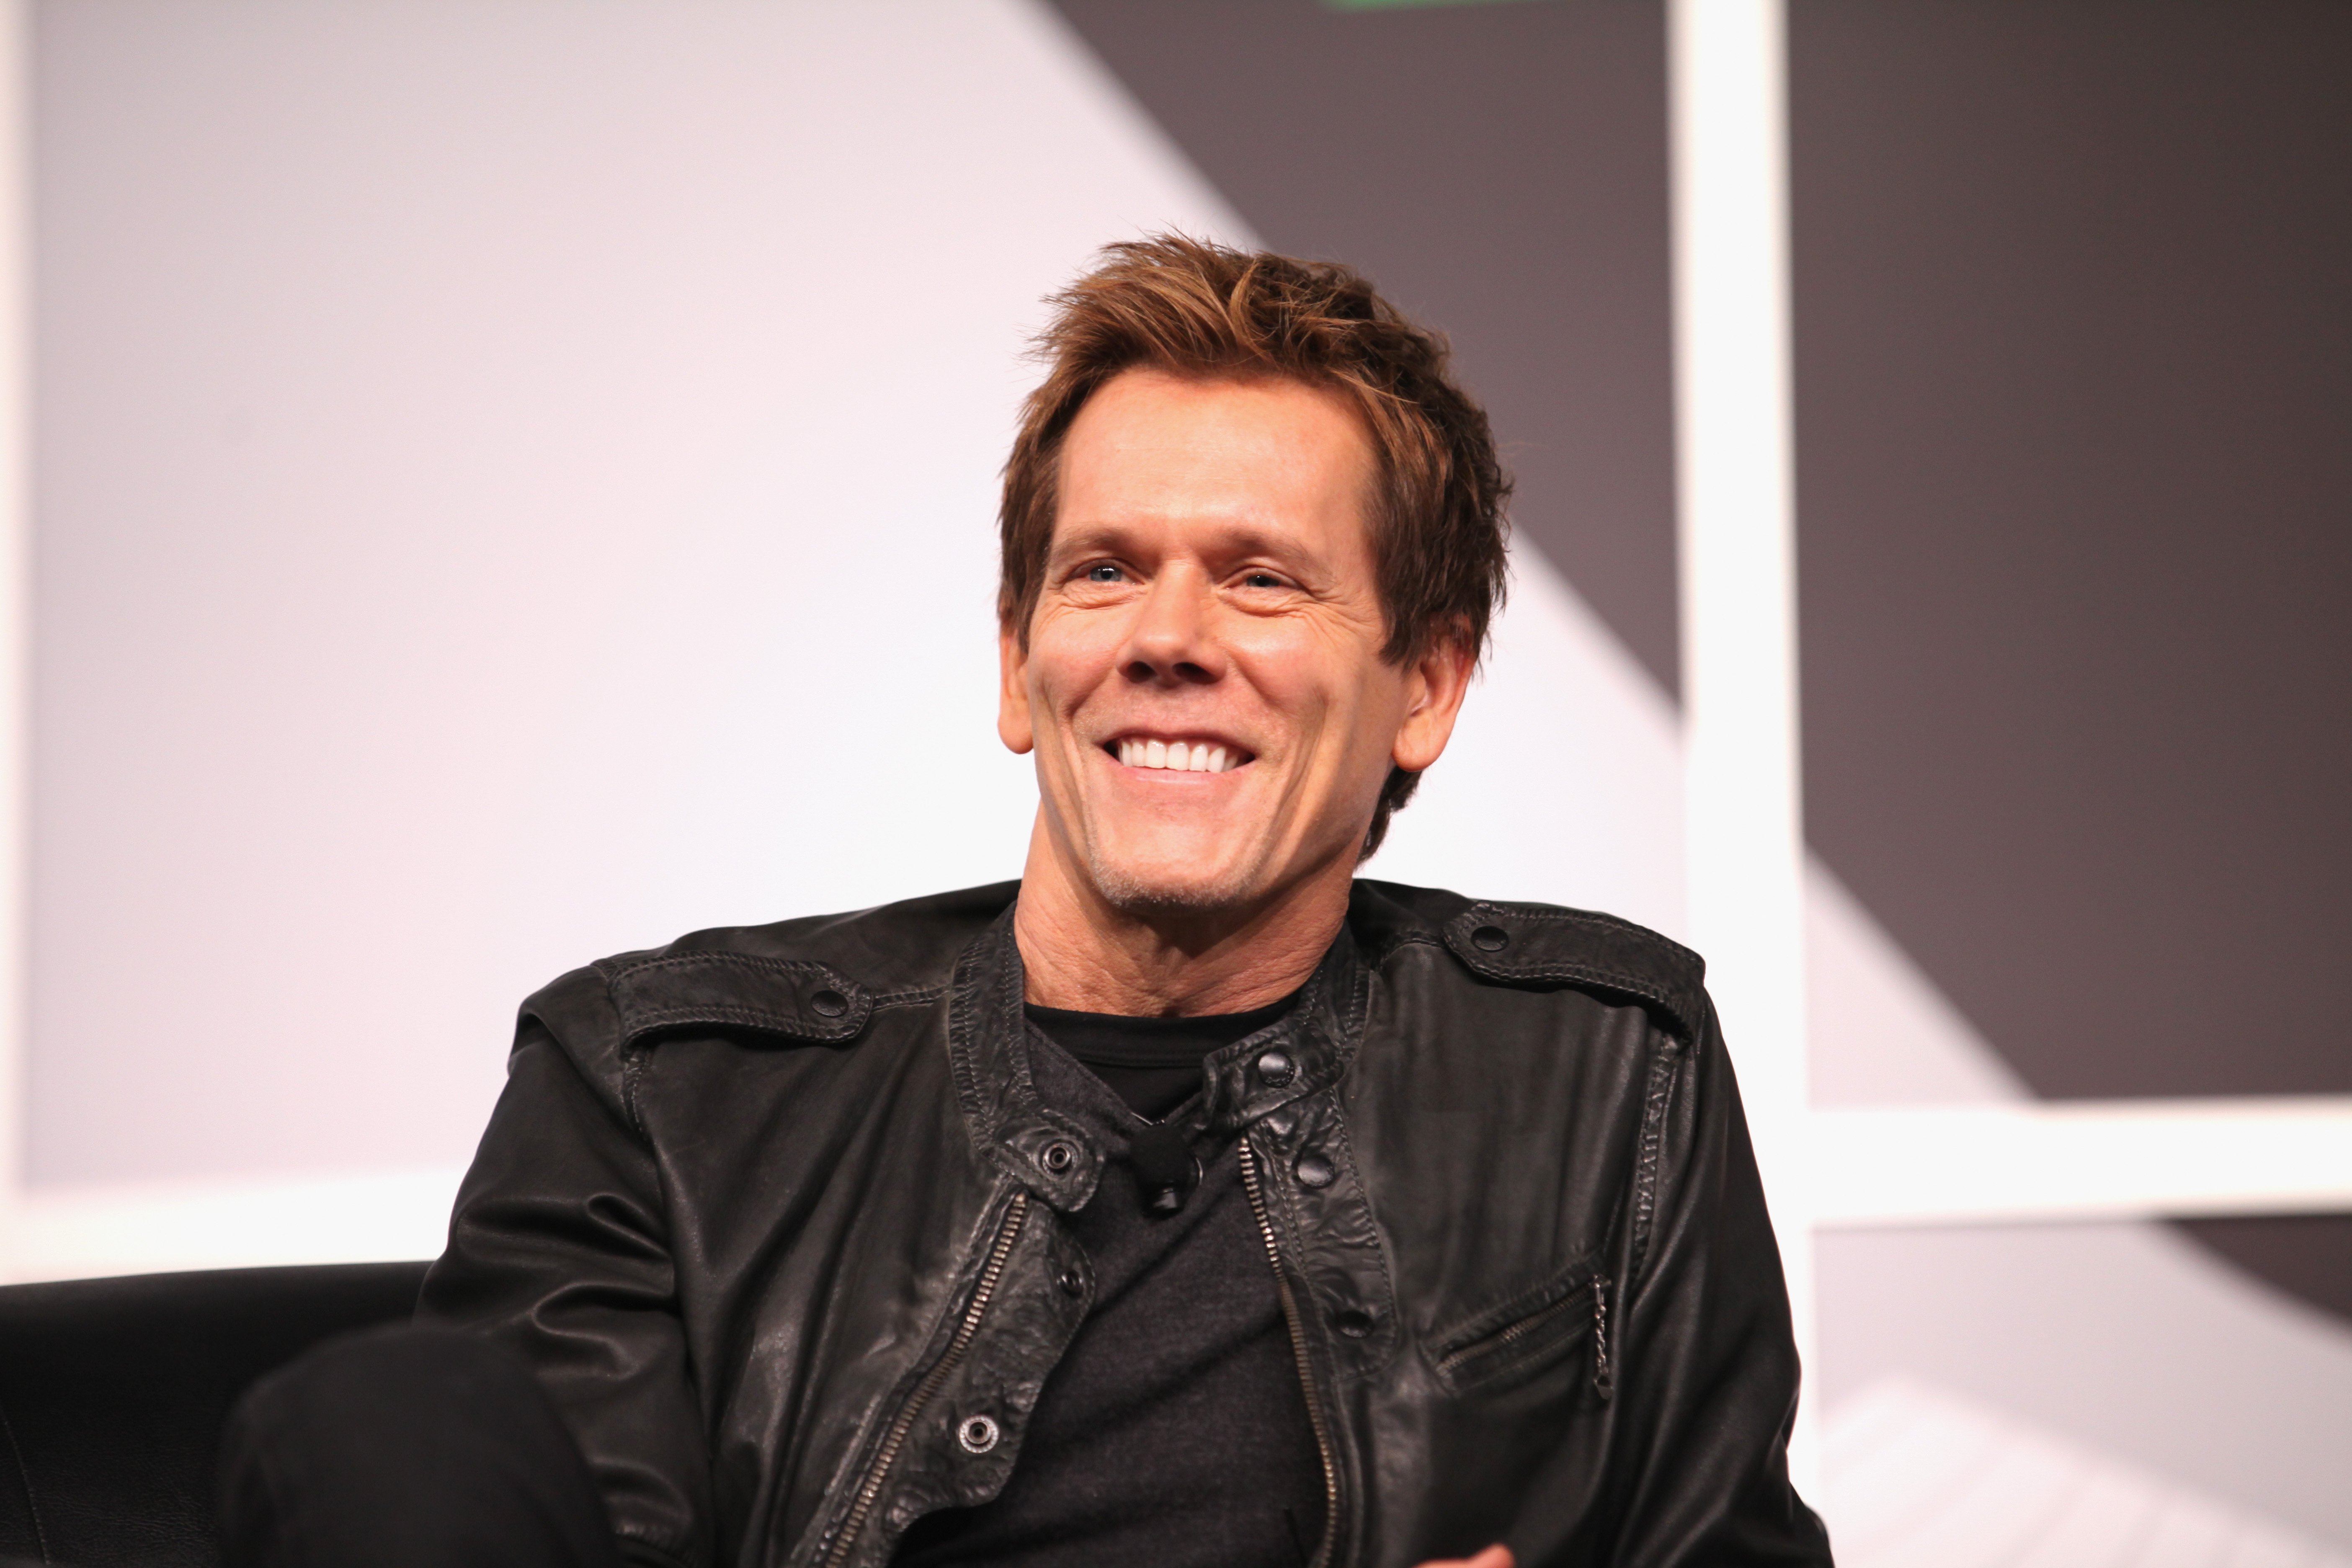 Kevin Bacon on the Disturbing Movie Role That Made Him Sleepwalk in Real Life